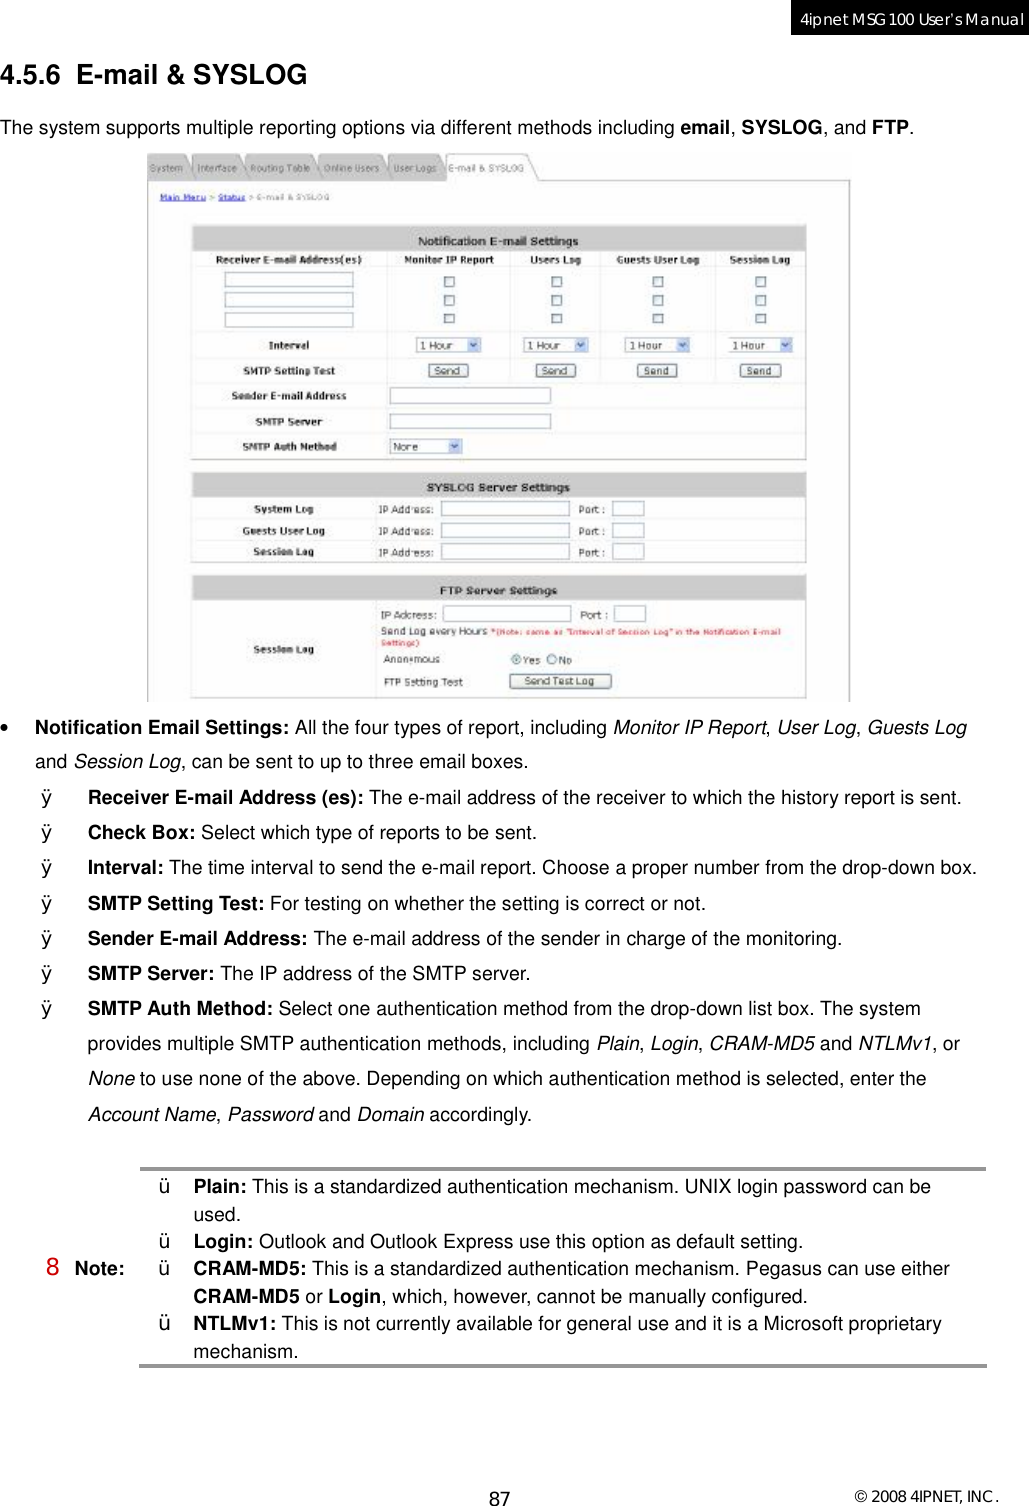  © 2008 4IPNET, INC. 87 4ipnet MSG100 User’s Manual  4.5.6 E-mail &amp; SYSLOG The system supports multiple reporting options via different methods including email, SYSLOG, and FTP.  • Notification Email Settings: All the four types of report, including Monitor IP Report, User Log, Guests Log and Session Log, can be sent to up to three email boxes. Ø Receiver E-mail Address (es): The e-mail address of the receiver to which the history report is sent. Ø Check Box: Select which type of reports to be sent. Ø Interval: The time interval to send the e-mail report. Choose a proper number from the drop-down box.  Ø SMTP Setting Test: For testing on whether the setting is correct or not. Ø Sender E-mail Address: The e-mail address of the sender in charge of the monitoring.  Ø SMTP Server: The IP address of the SMTP server. Ø SMTP Auth Method: Select one authentication method from the drop-down list box. The system provides multiple SMTP authentication methods, including Plain, Login, CRAM-MD5 and NTLMv1, or None to use none of the above. Depending on which authentication method is selected, enter the Account Name, Password and Domain accordingly.  8 Note: Ÿ Plain: This is a standardized authentication mechanism. UNIX login password can be used.  Ÿ Login: Outlook and Outlook Express use this option as default setting.  Ÿ CRAM-MD5: This is a standardized authentication mechanism. Pegasus can use either CRAM-MD5 or Login, which, however, cannot be manually configured.  Ÿ NTLMv1: This is not currently available for general use and it is a Microsoft proprietary mechanism.  